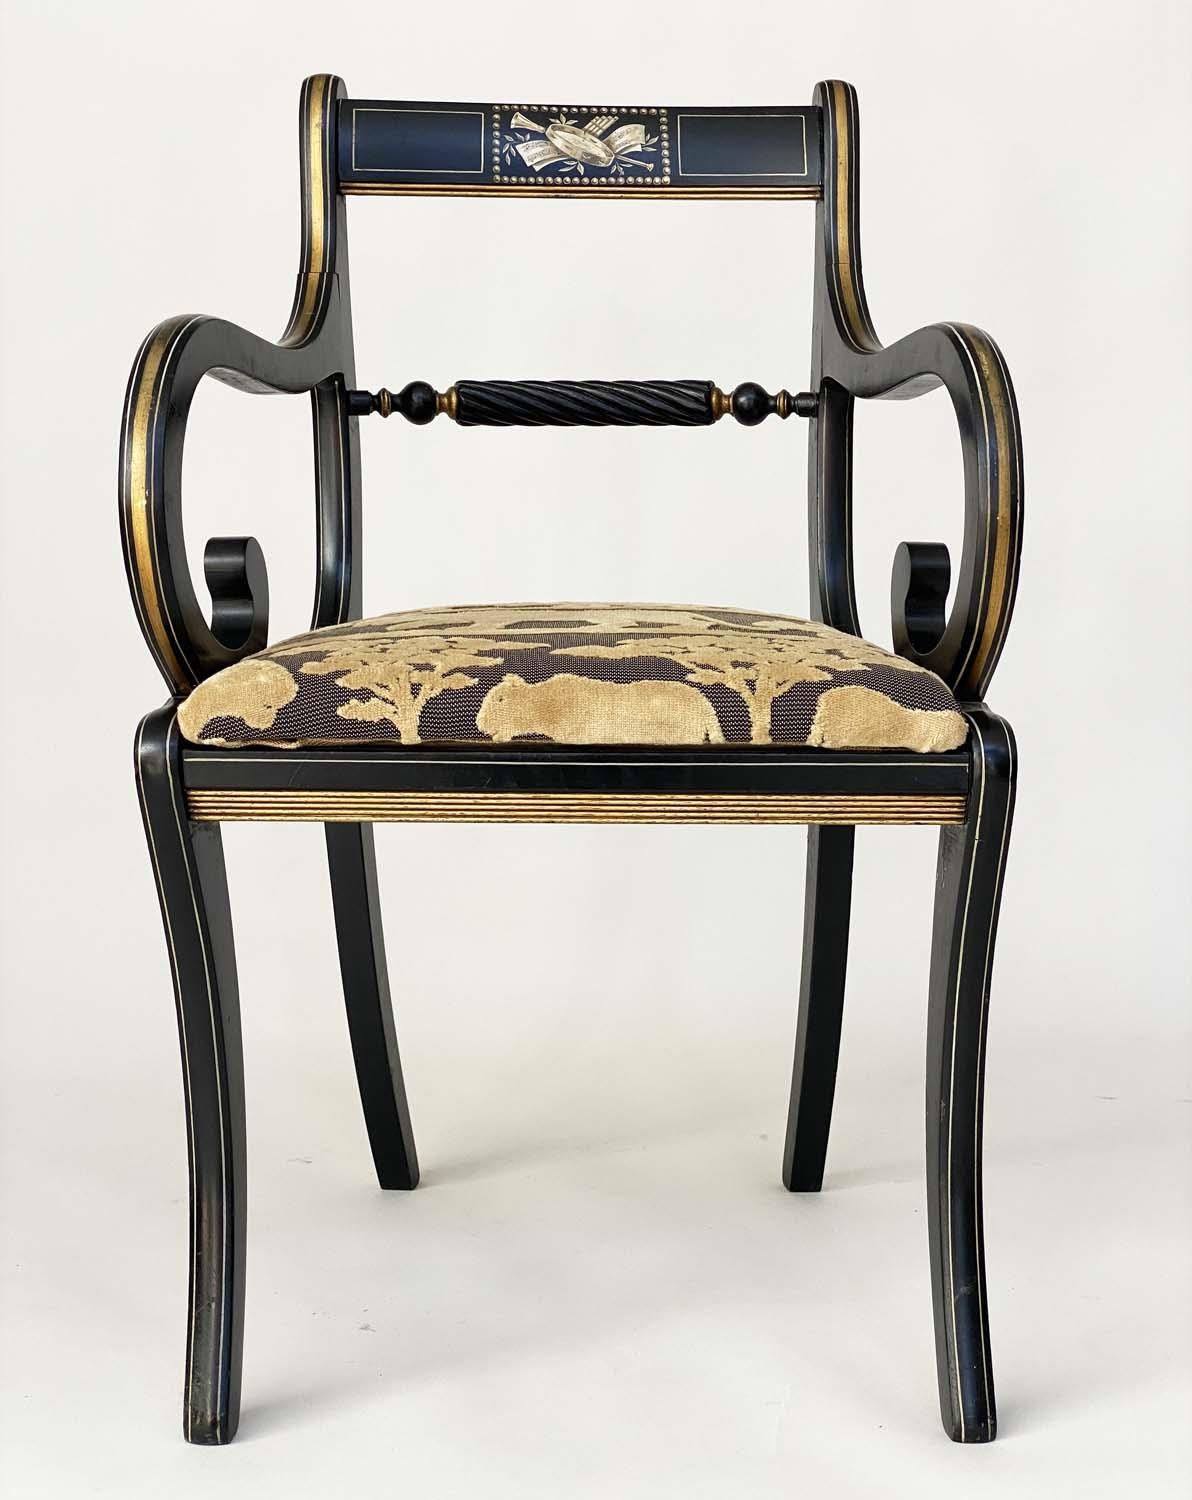 ELBOW CHAIRS, a pair, Regency design, lacquered and gilt with Andrew Martin 'Safari', fabric - Image 9 of 11